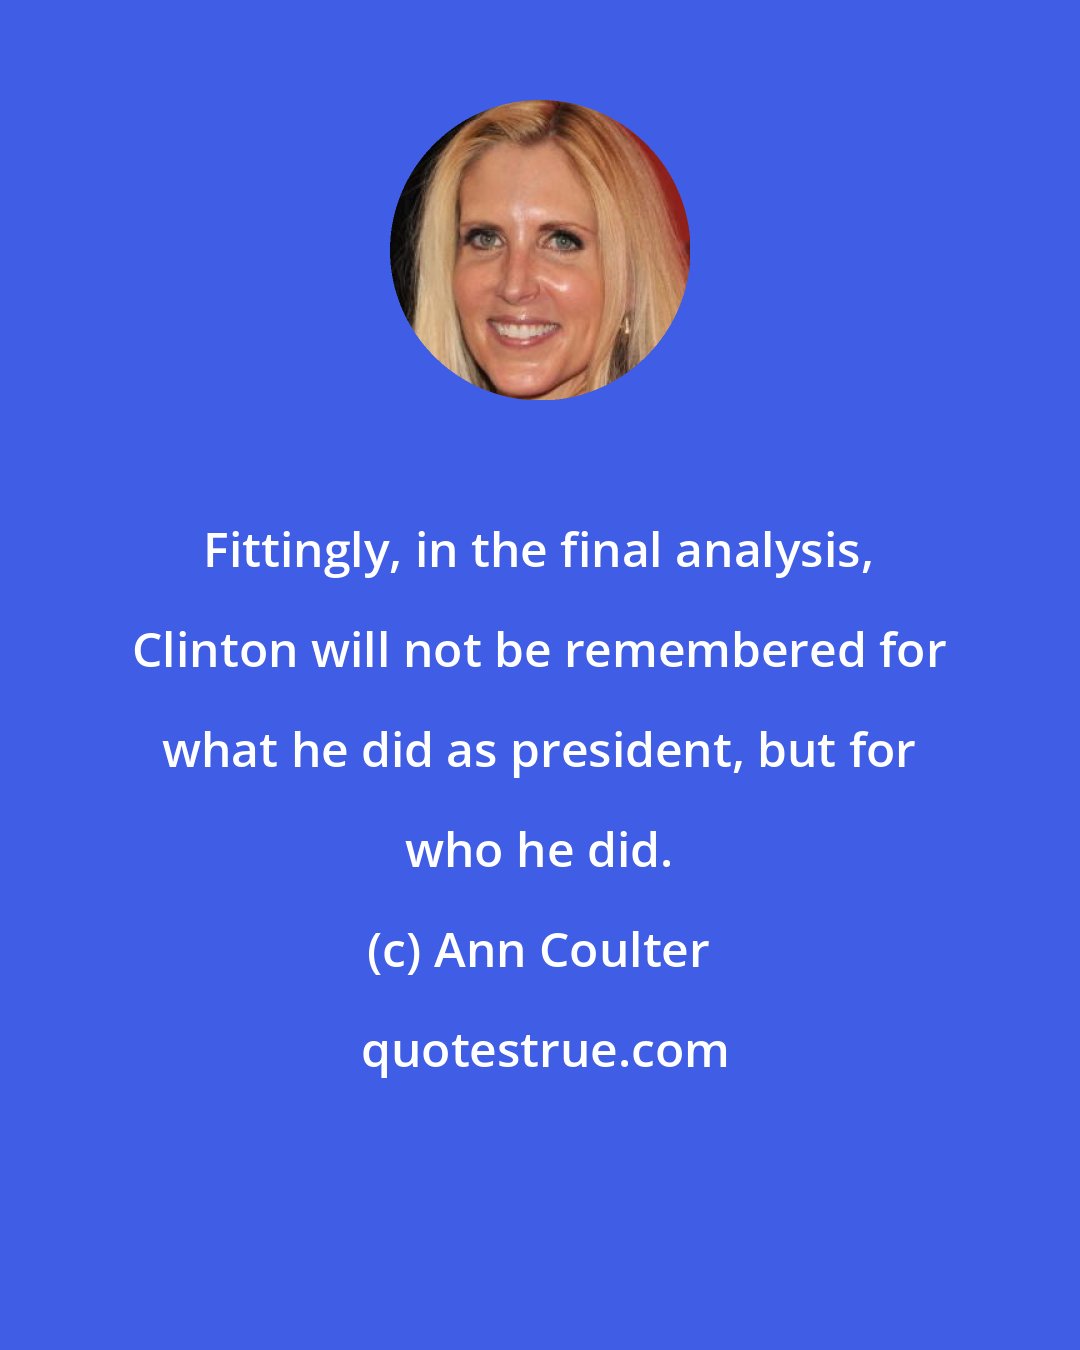 Ann Coulter: Fittingly, in the final analysis, Clinton will not be remembered for what he did as president, but for who he did.